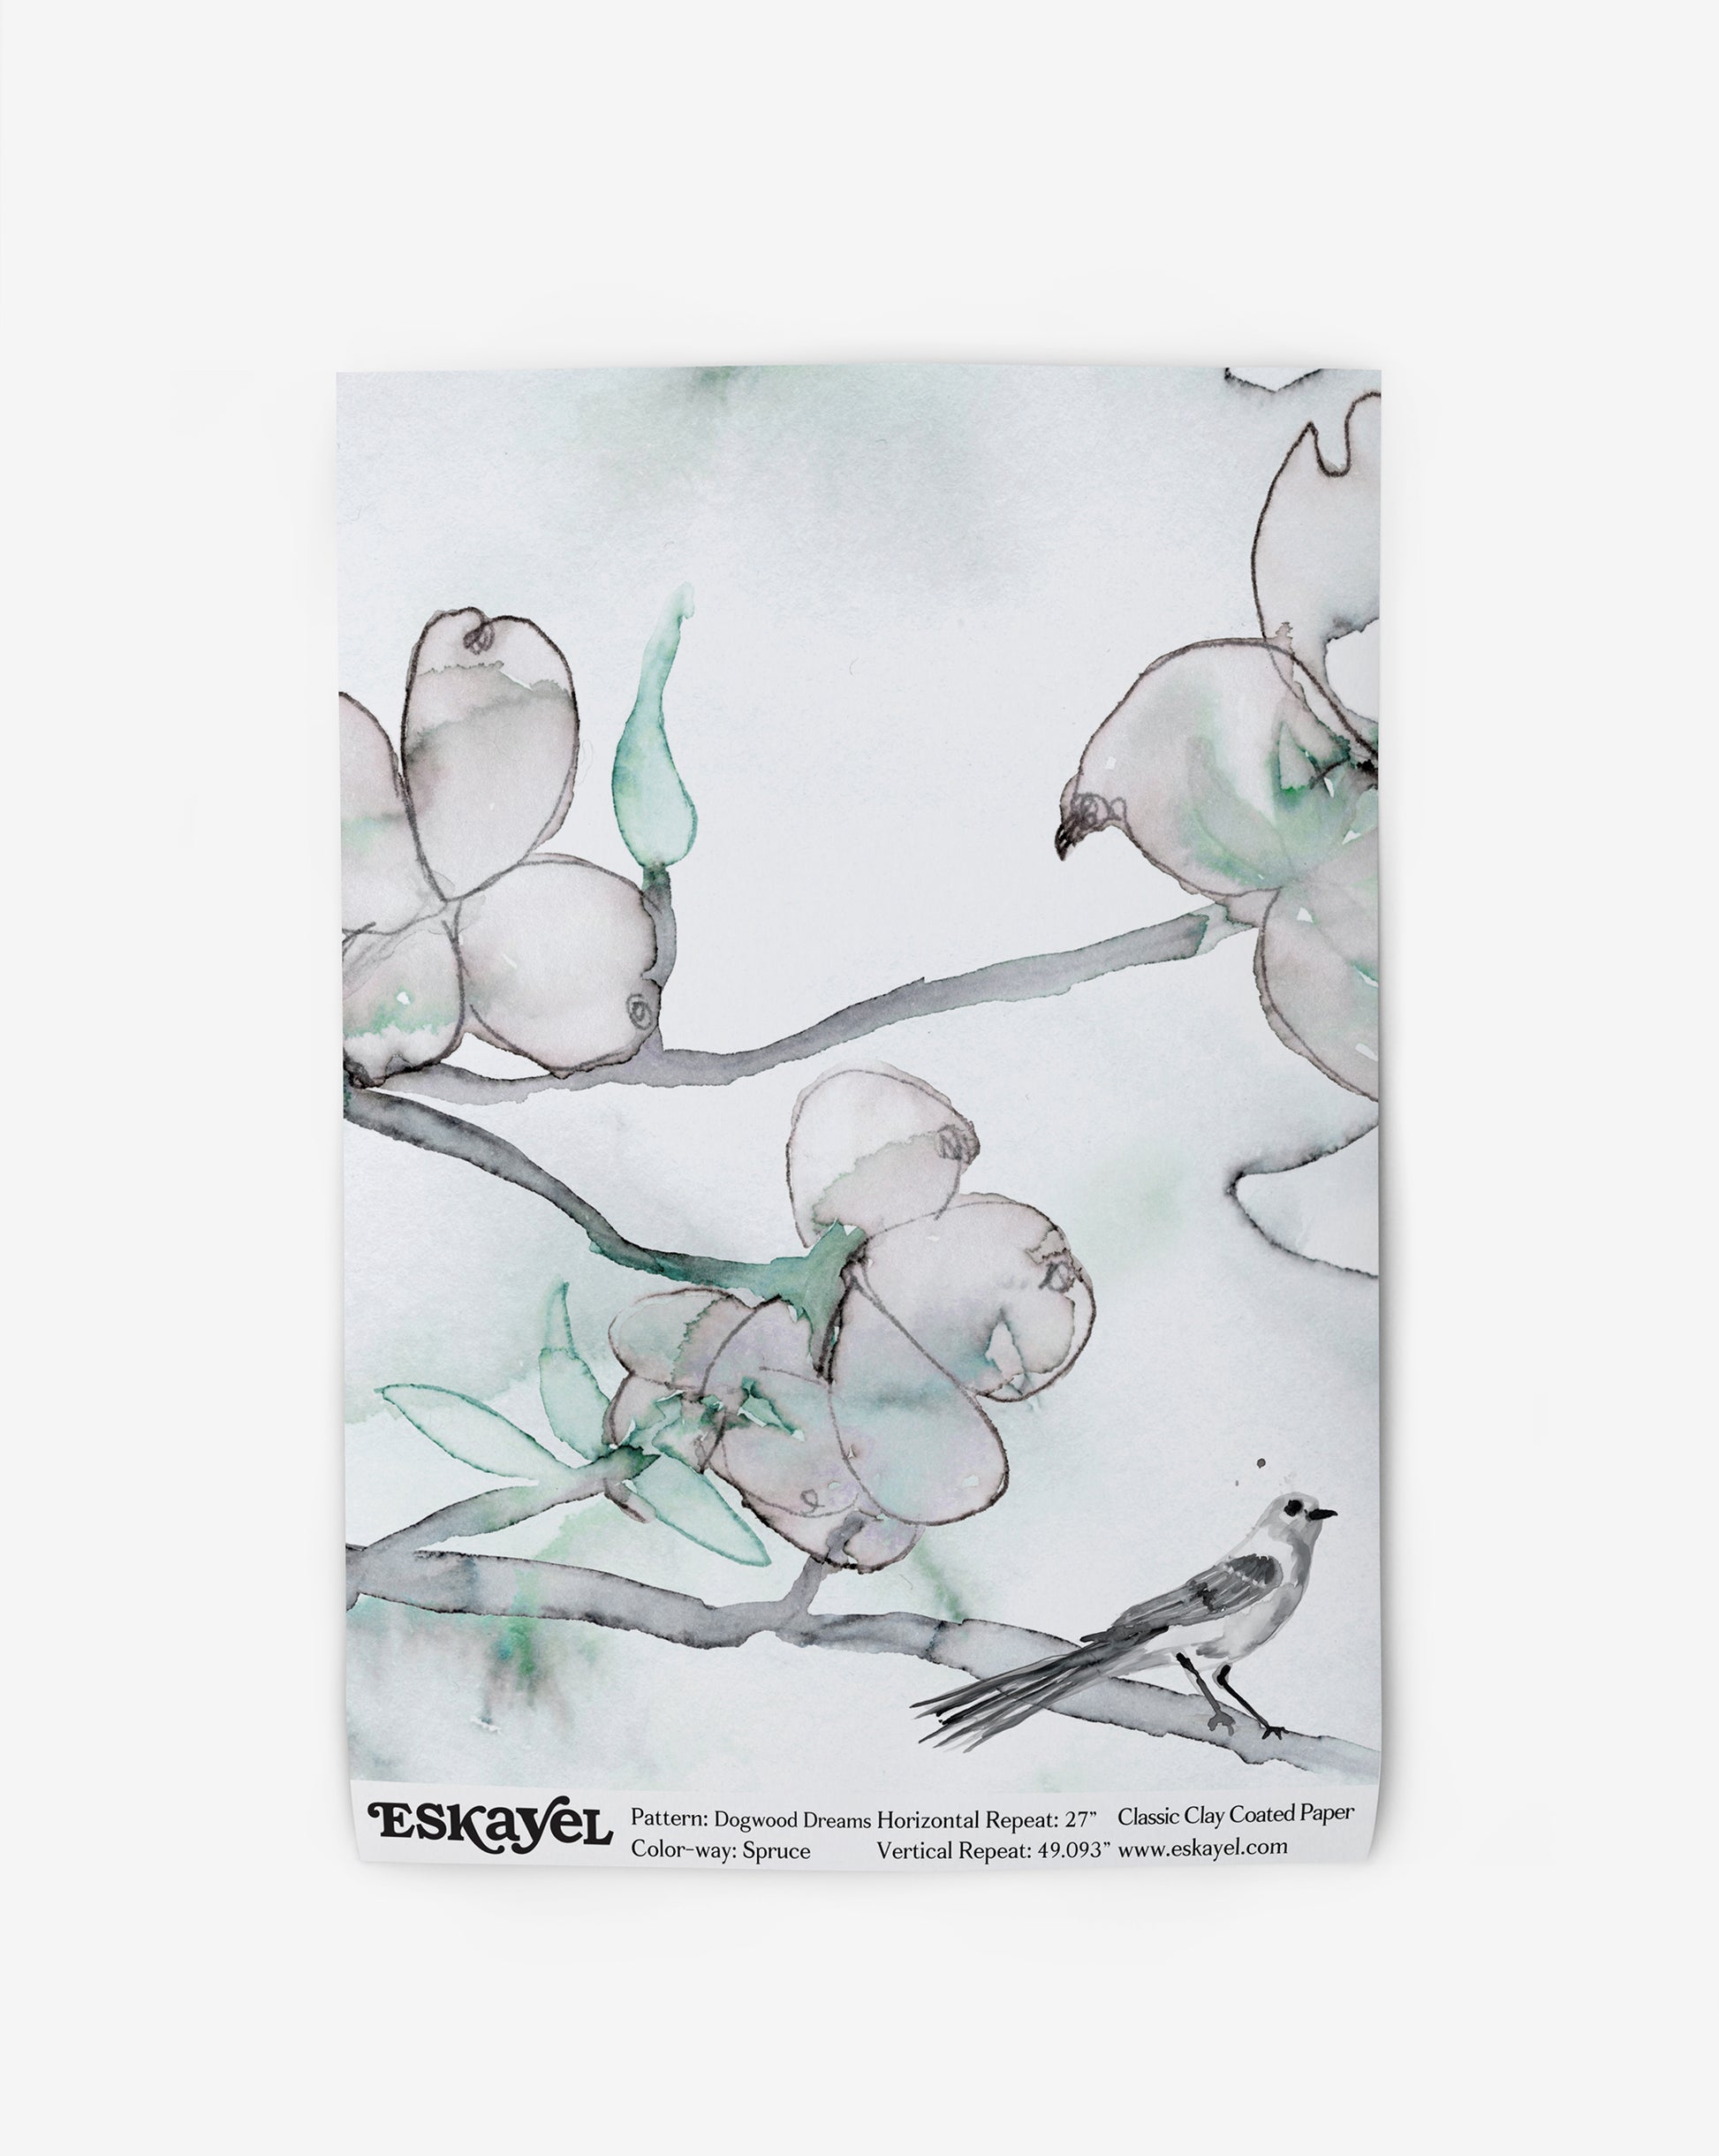 Dogwood Dreams Wallpaper - a bird and flowers on a branch, in a custom luxury Spruce colorway